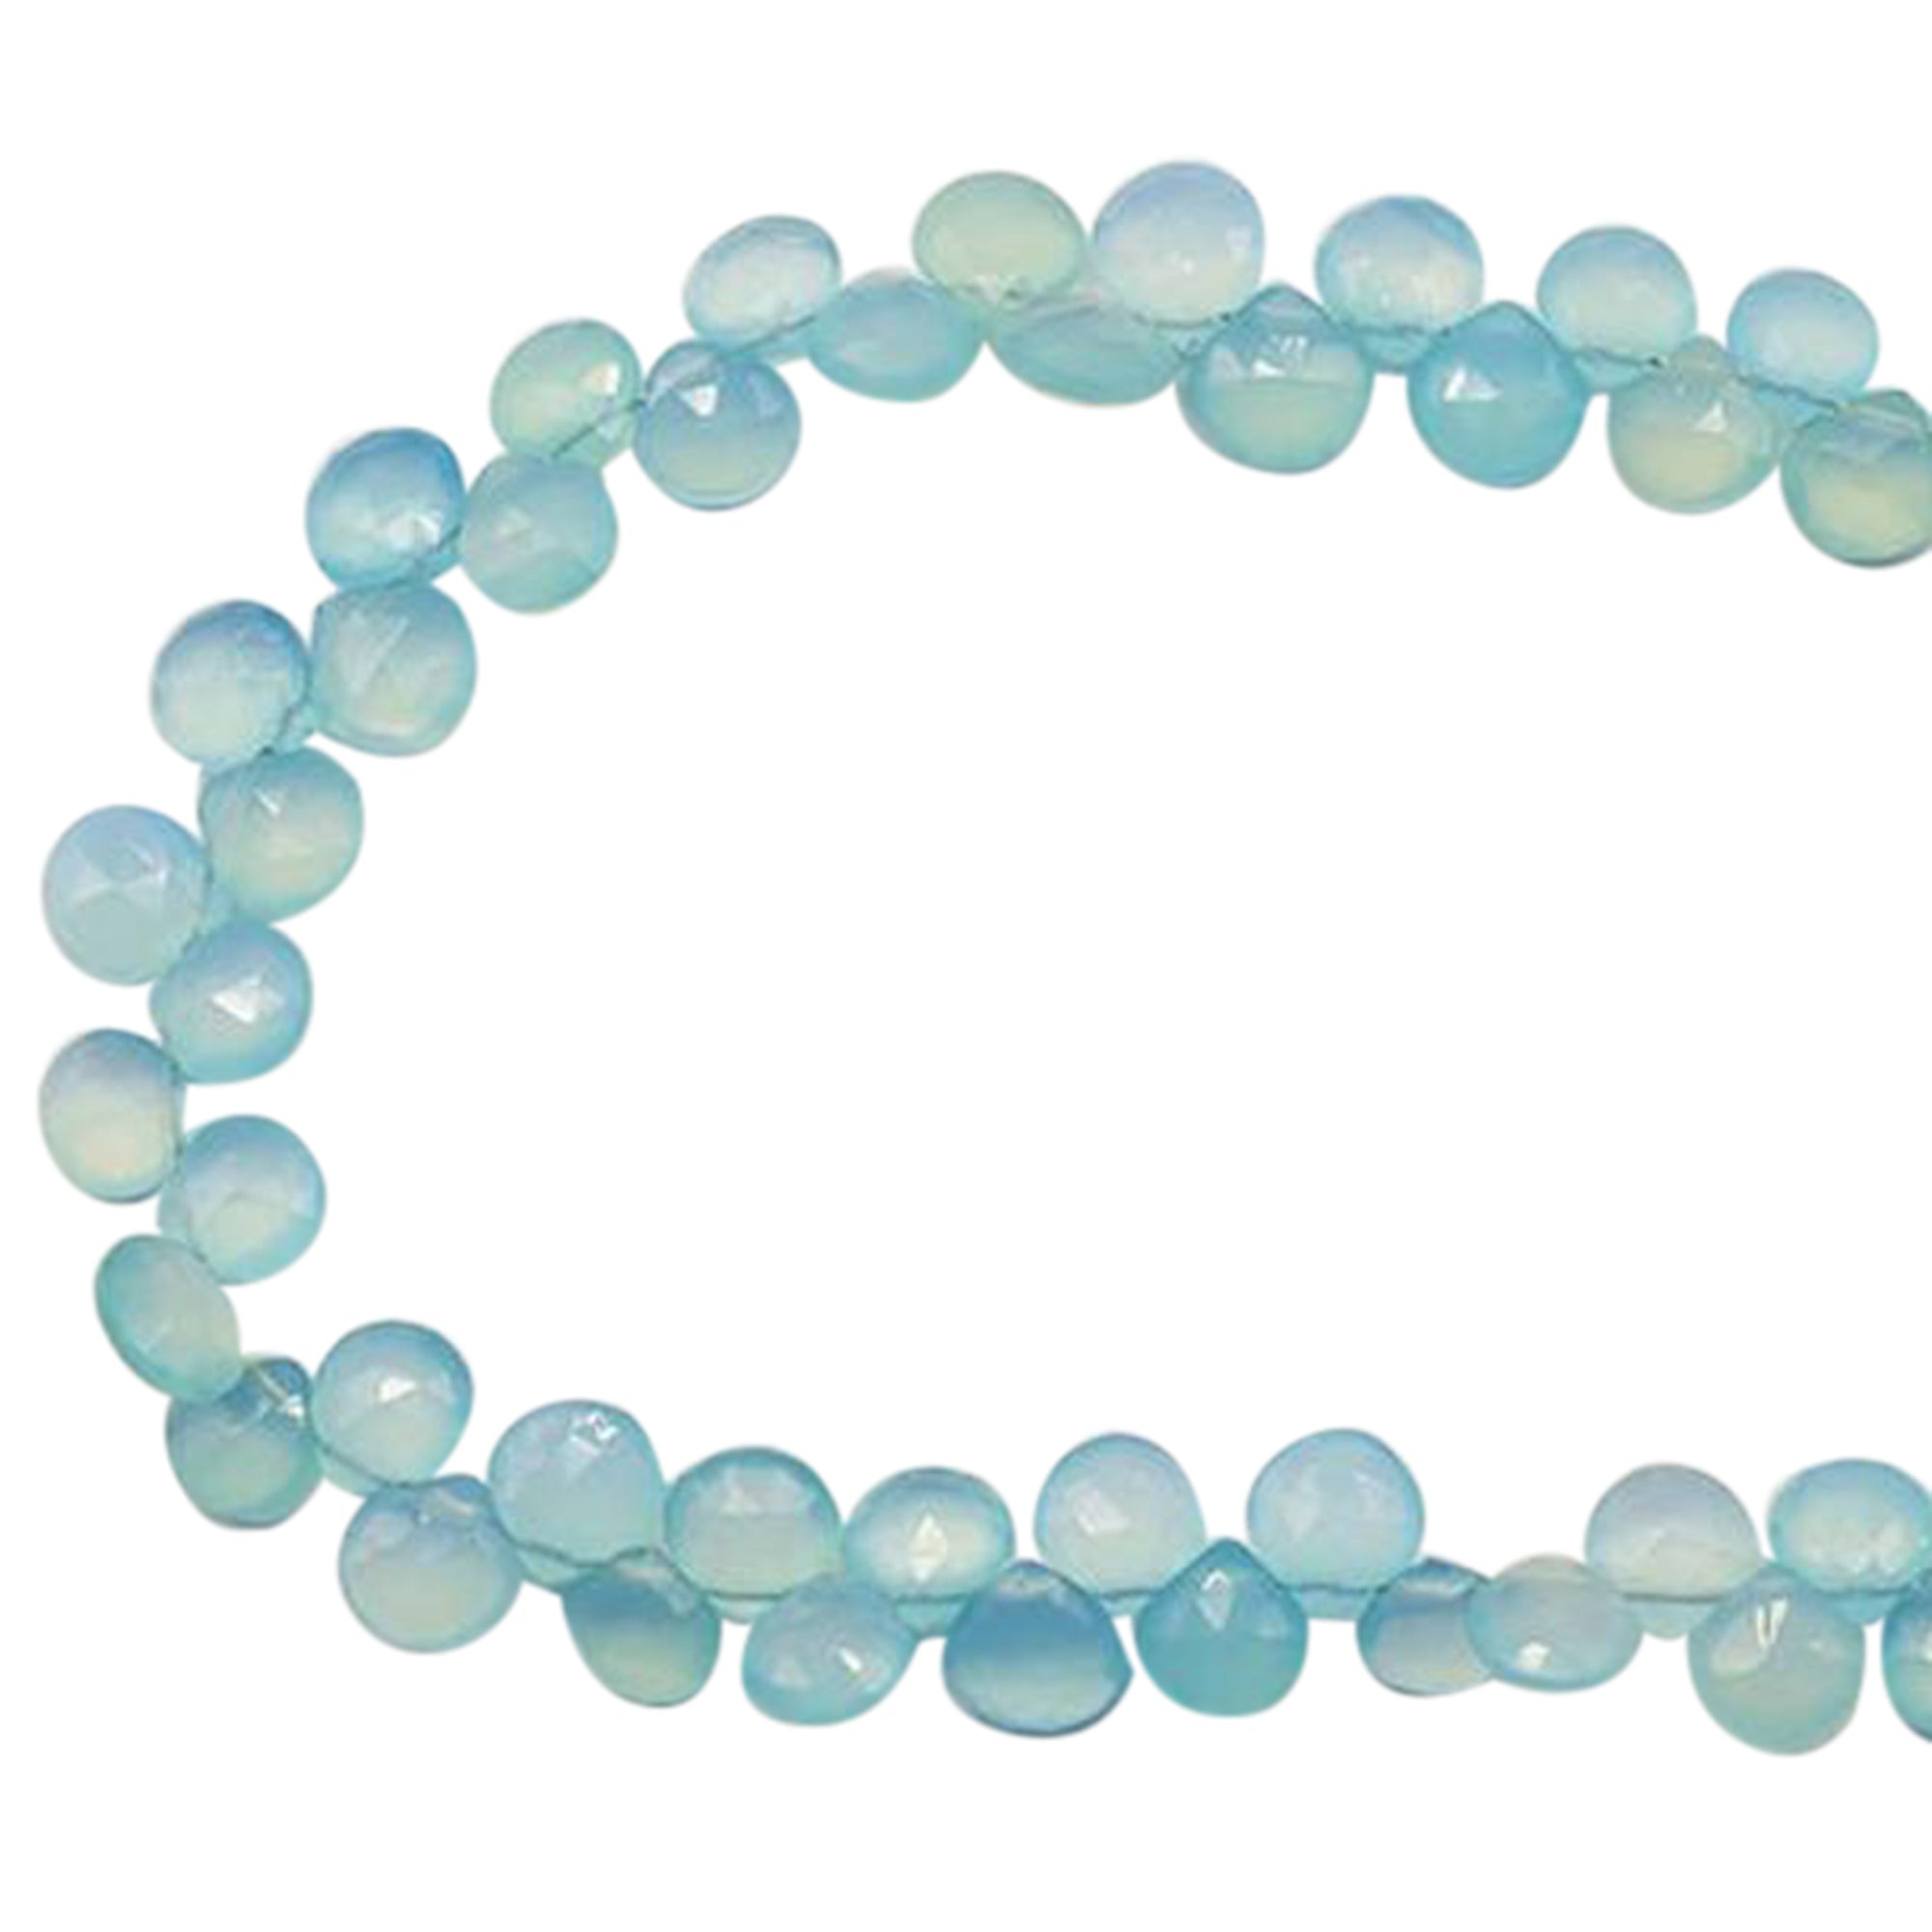 Dyed Blue Chalcedony 5 To 6 MM Faceted Heart Shape Beads Strand